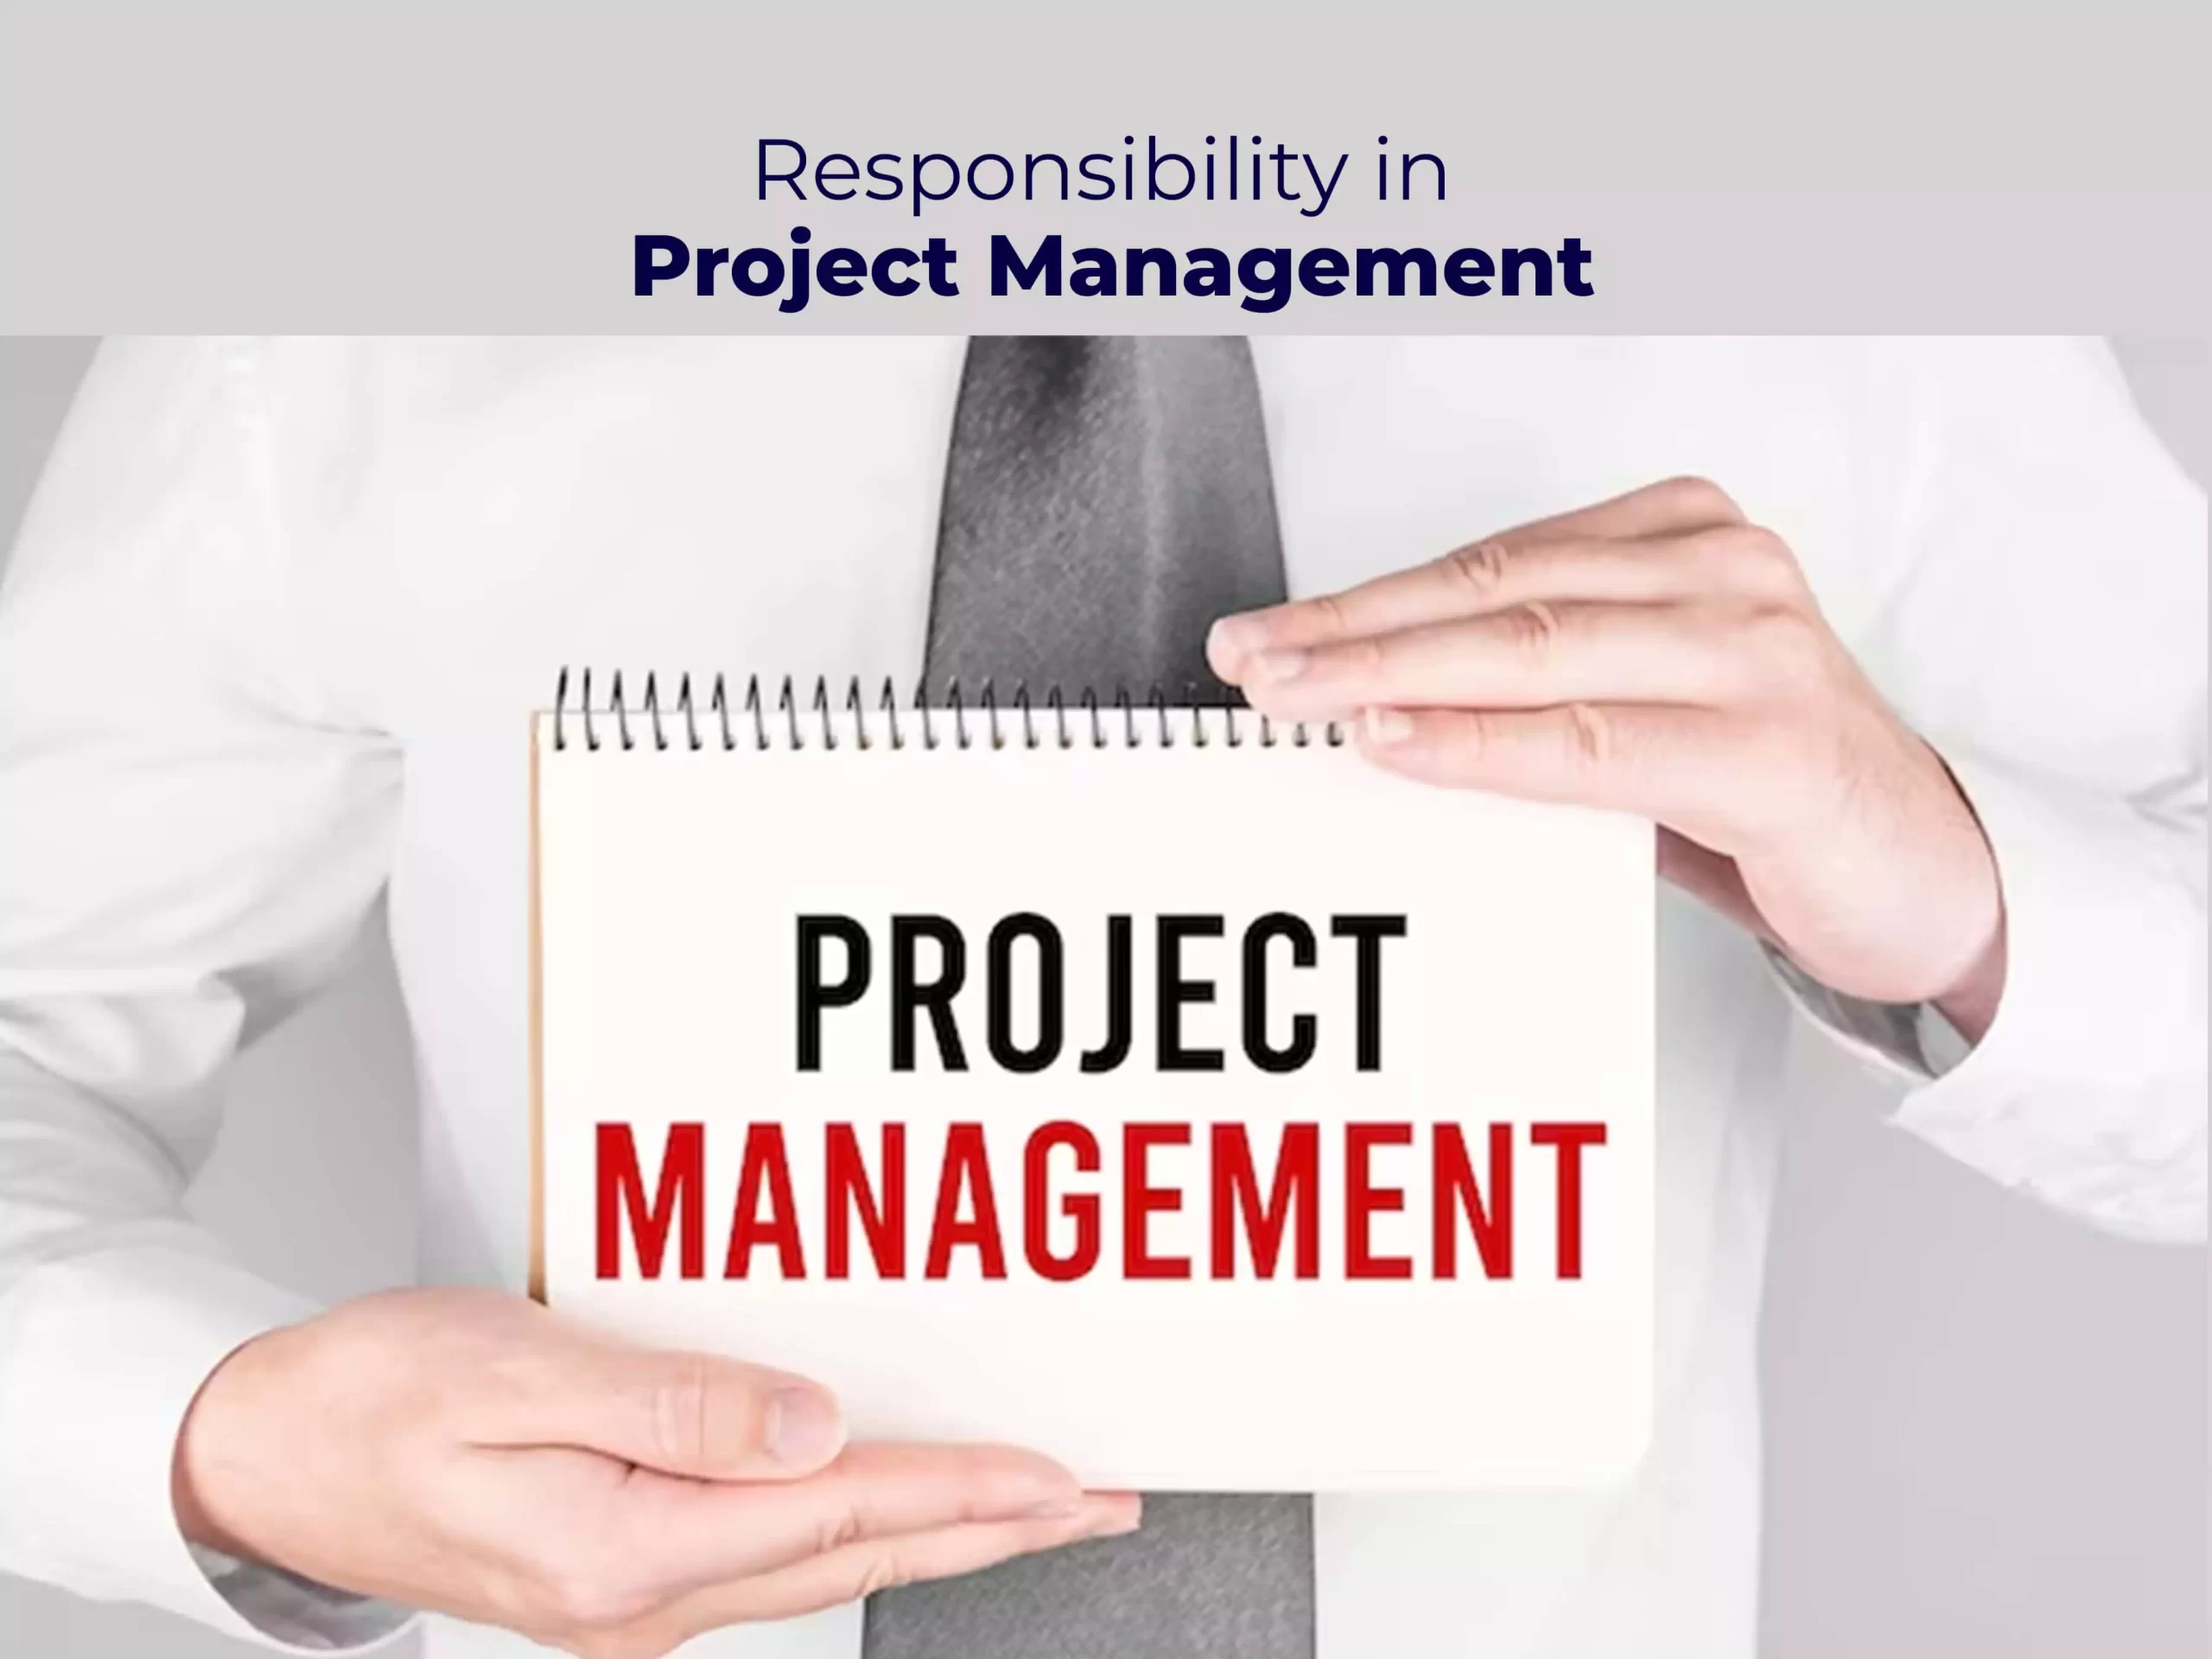 Responsibility in Project Management